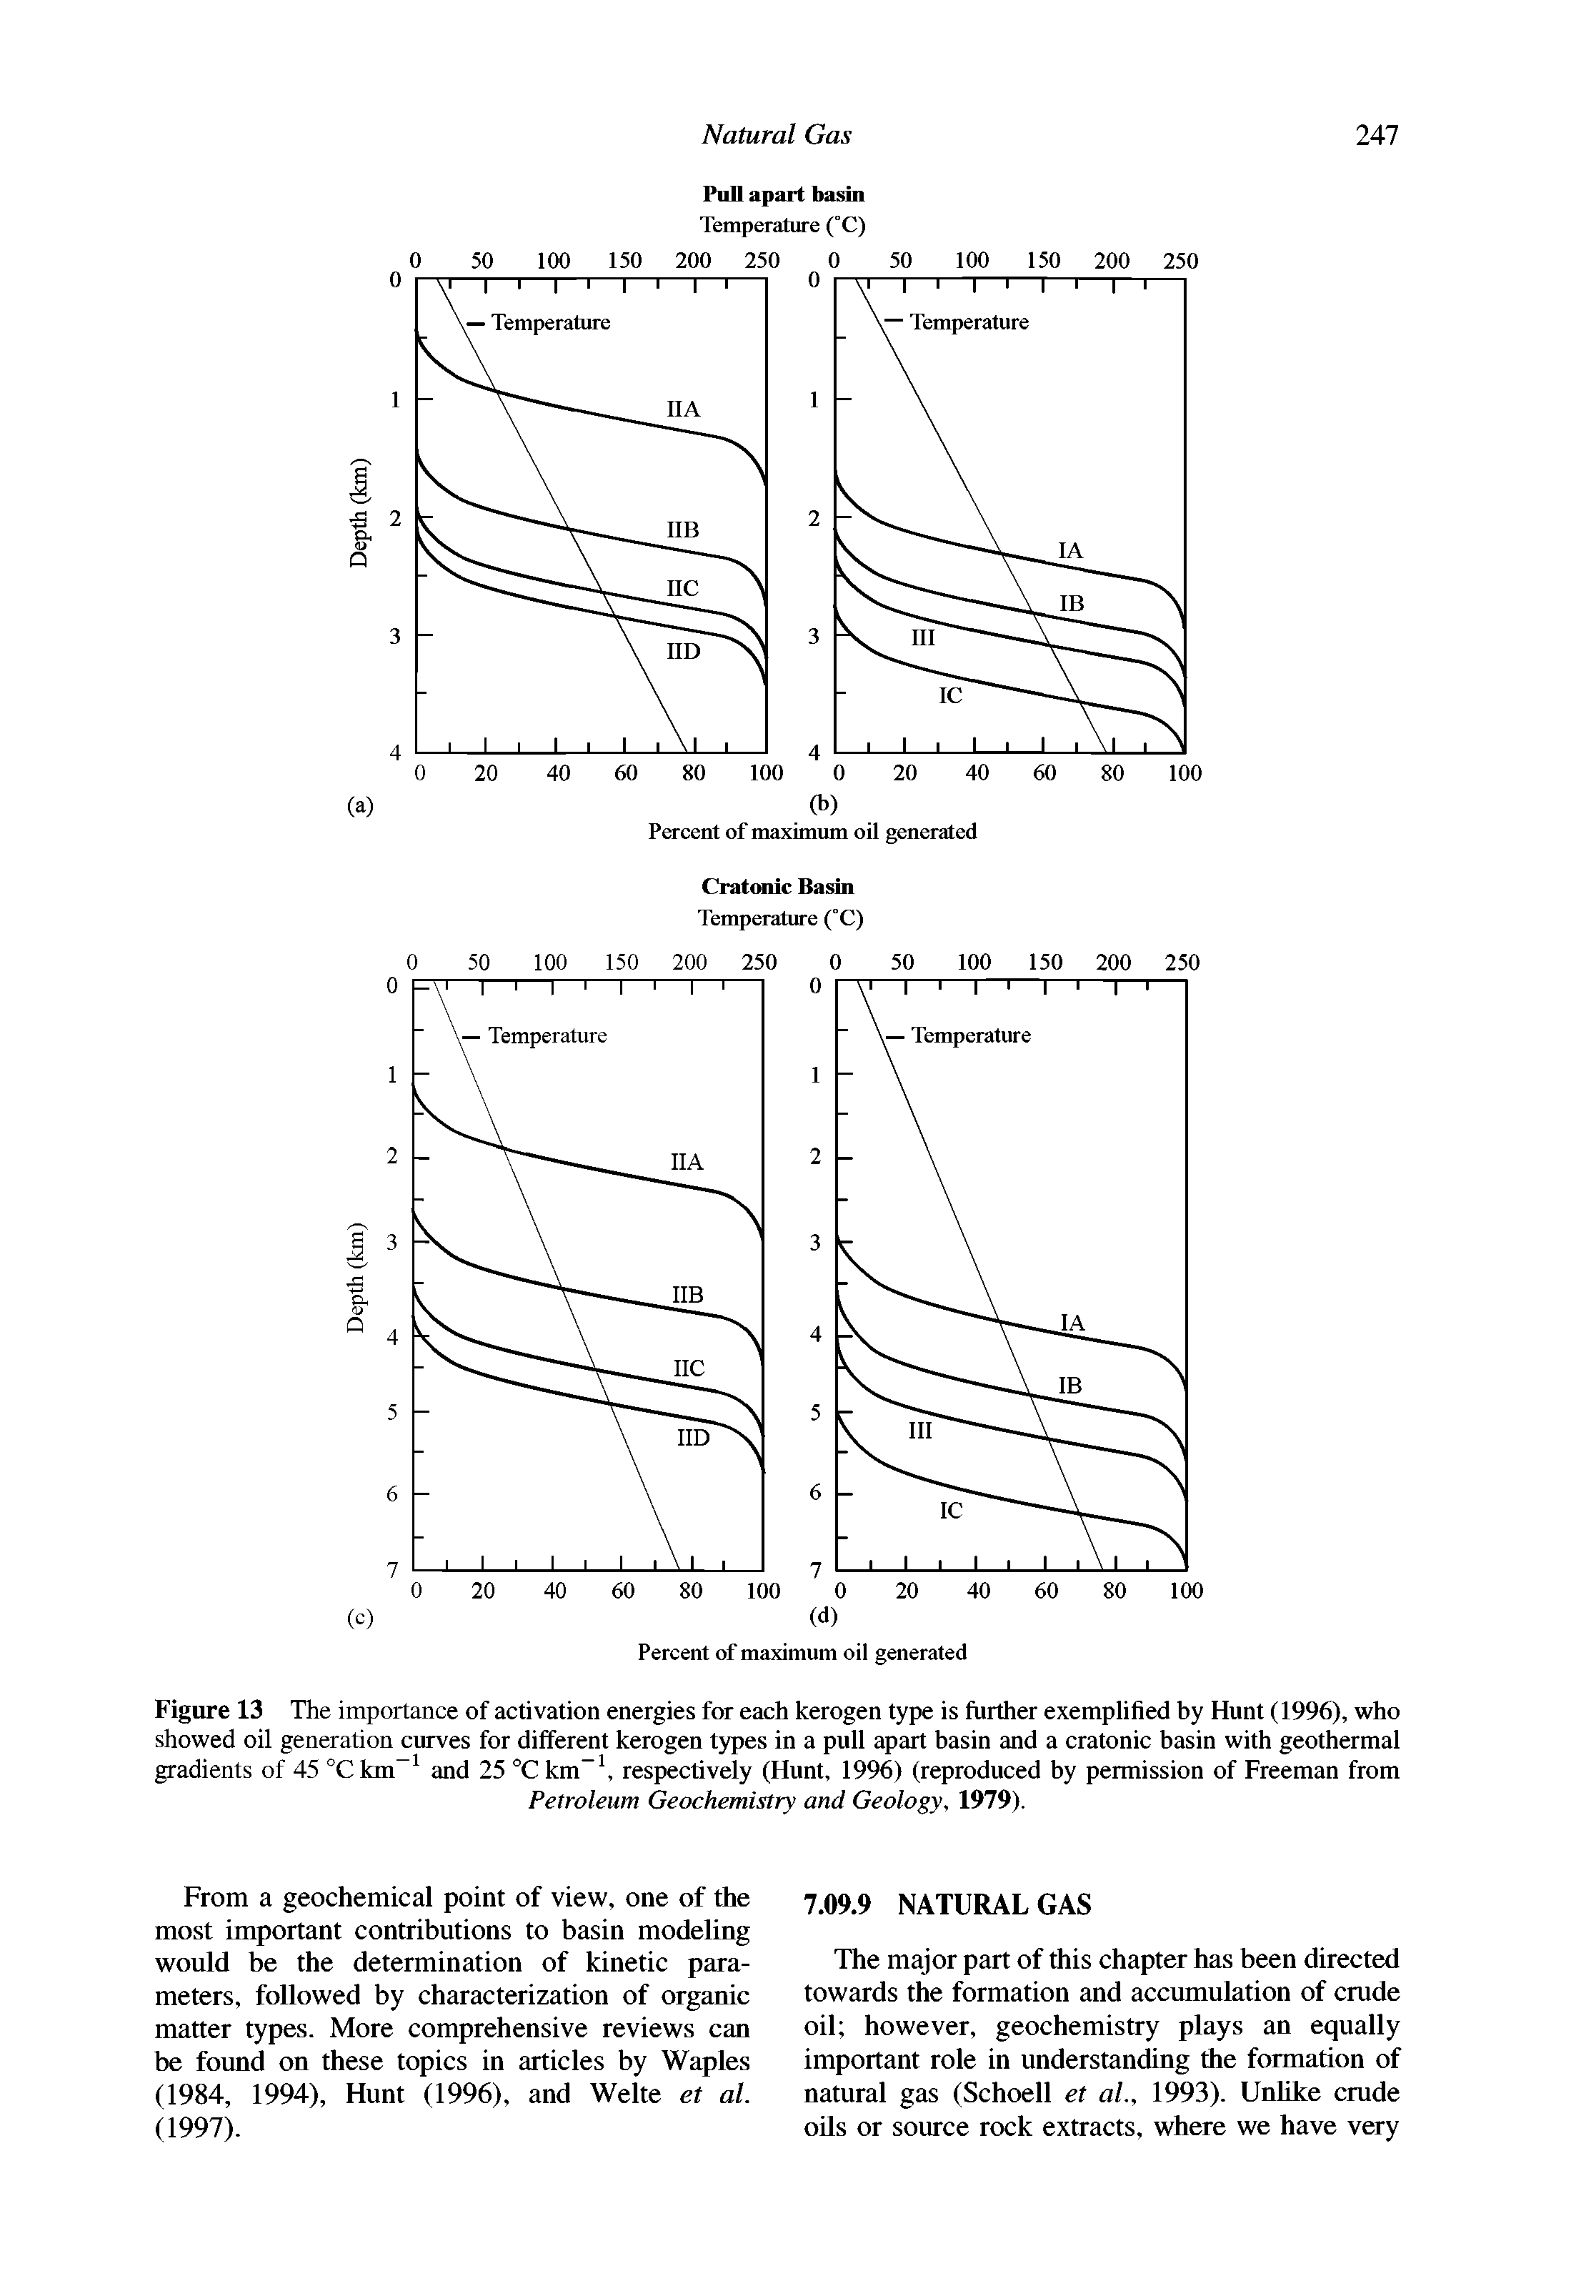 Figure 13 The importance of activation energies for each kerogen type is further exemplified by Hunt (1996), who showed oil generation curves for different kerogen types in a pull apart basin and a cratonic basin with geothermal gradients of 45 °Ckm and 25 °C km , respectively (Hunt, 1996) (reproduced by permission of Freeman from...